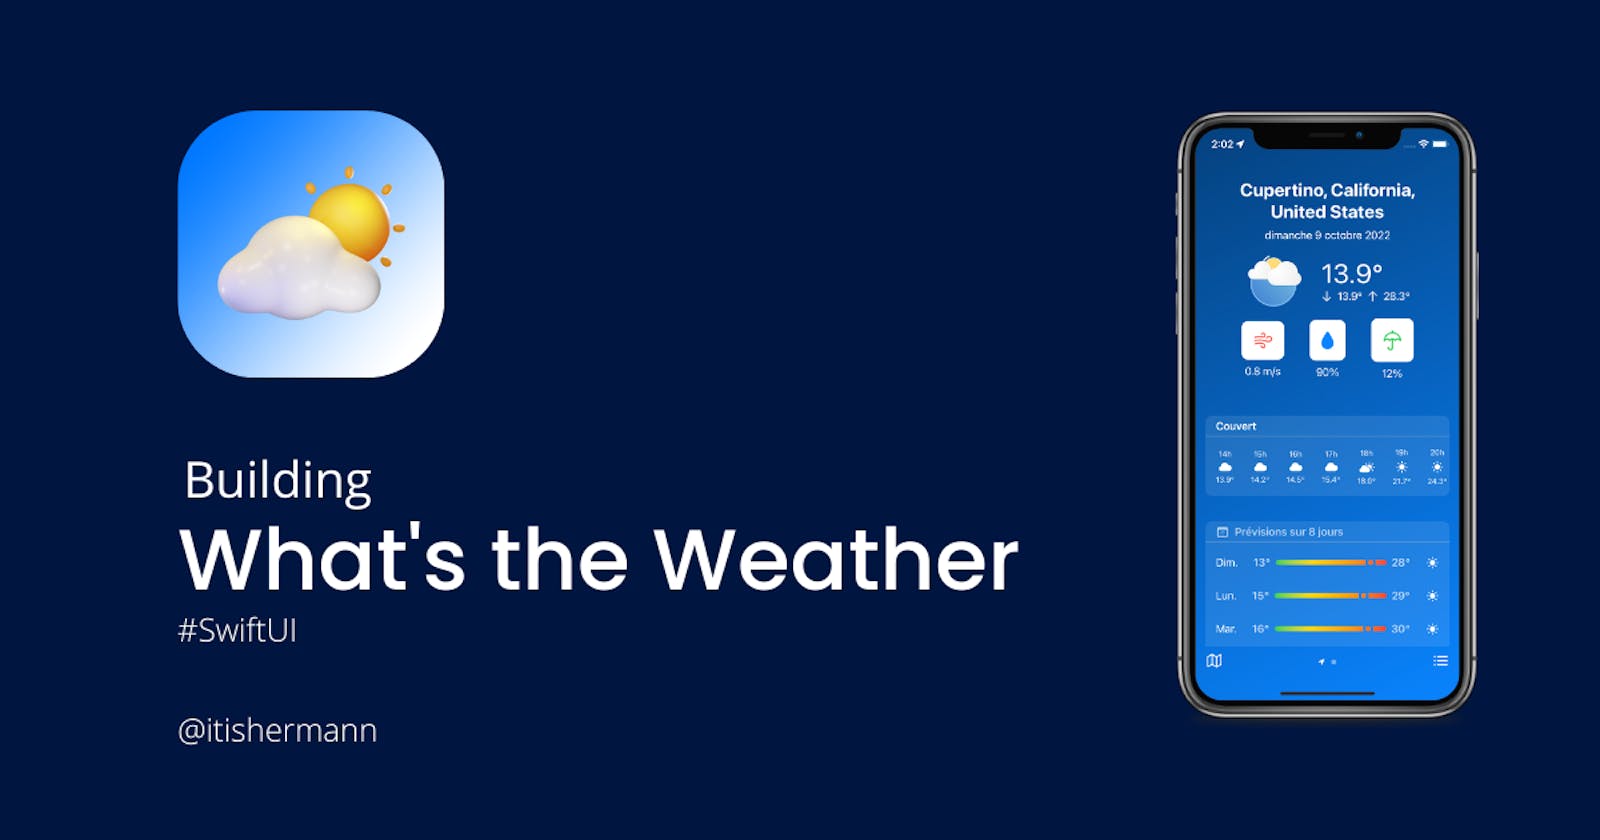 Building an Weather app on iOS - what's the weather ?